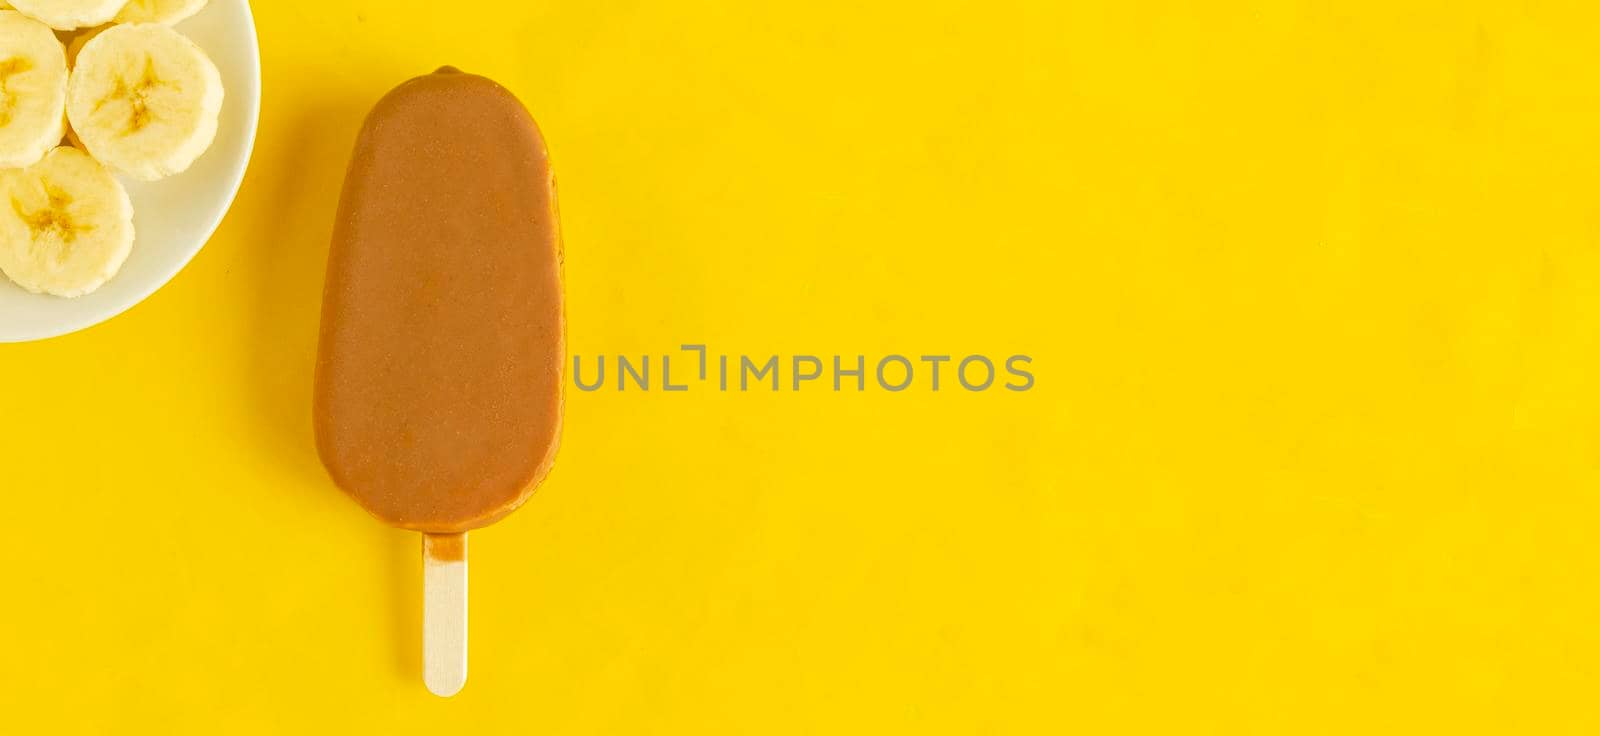 Banana vanilla popsicle in chocolated glaze on bright yellow background. by andre_dechapelle